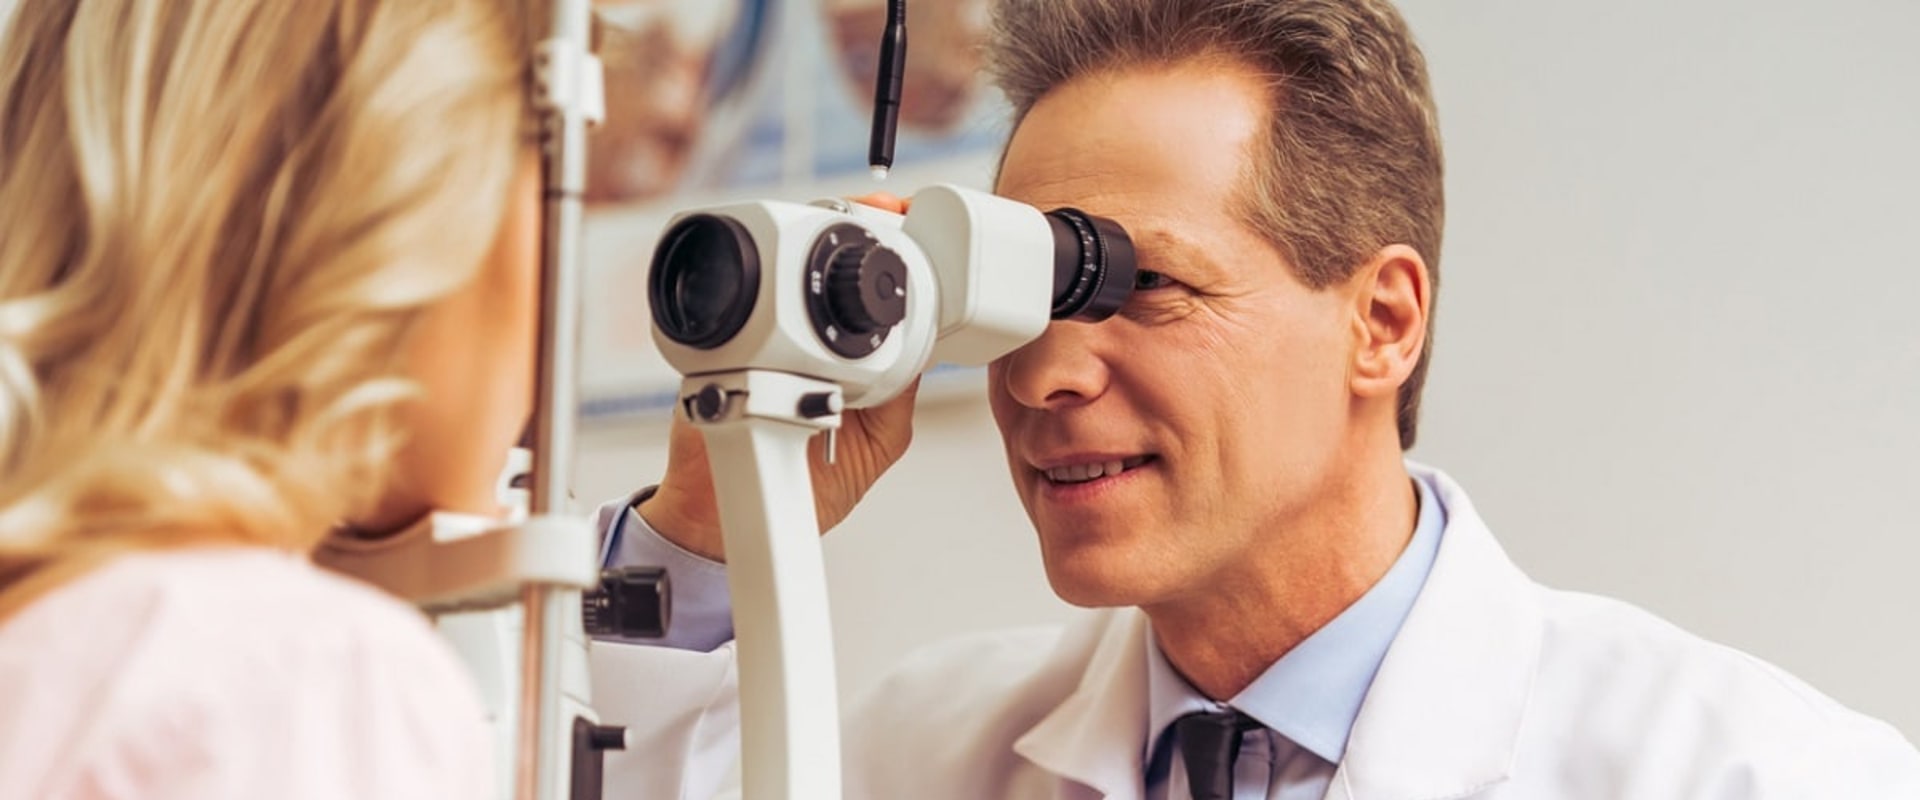 Can LASIK Surgery Help Glaucoma Patients?